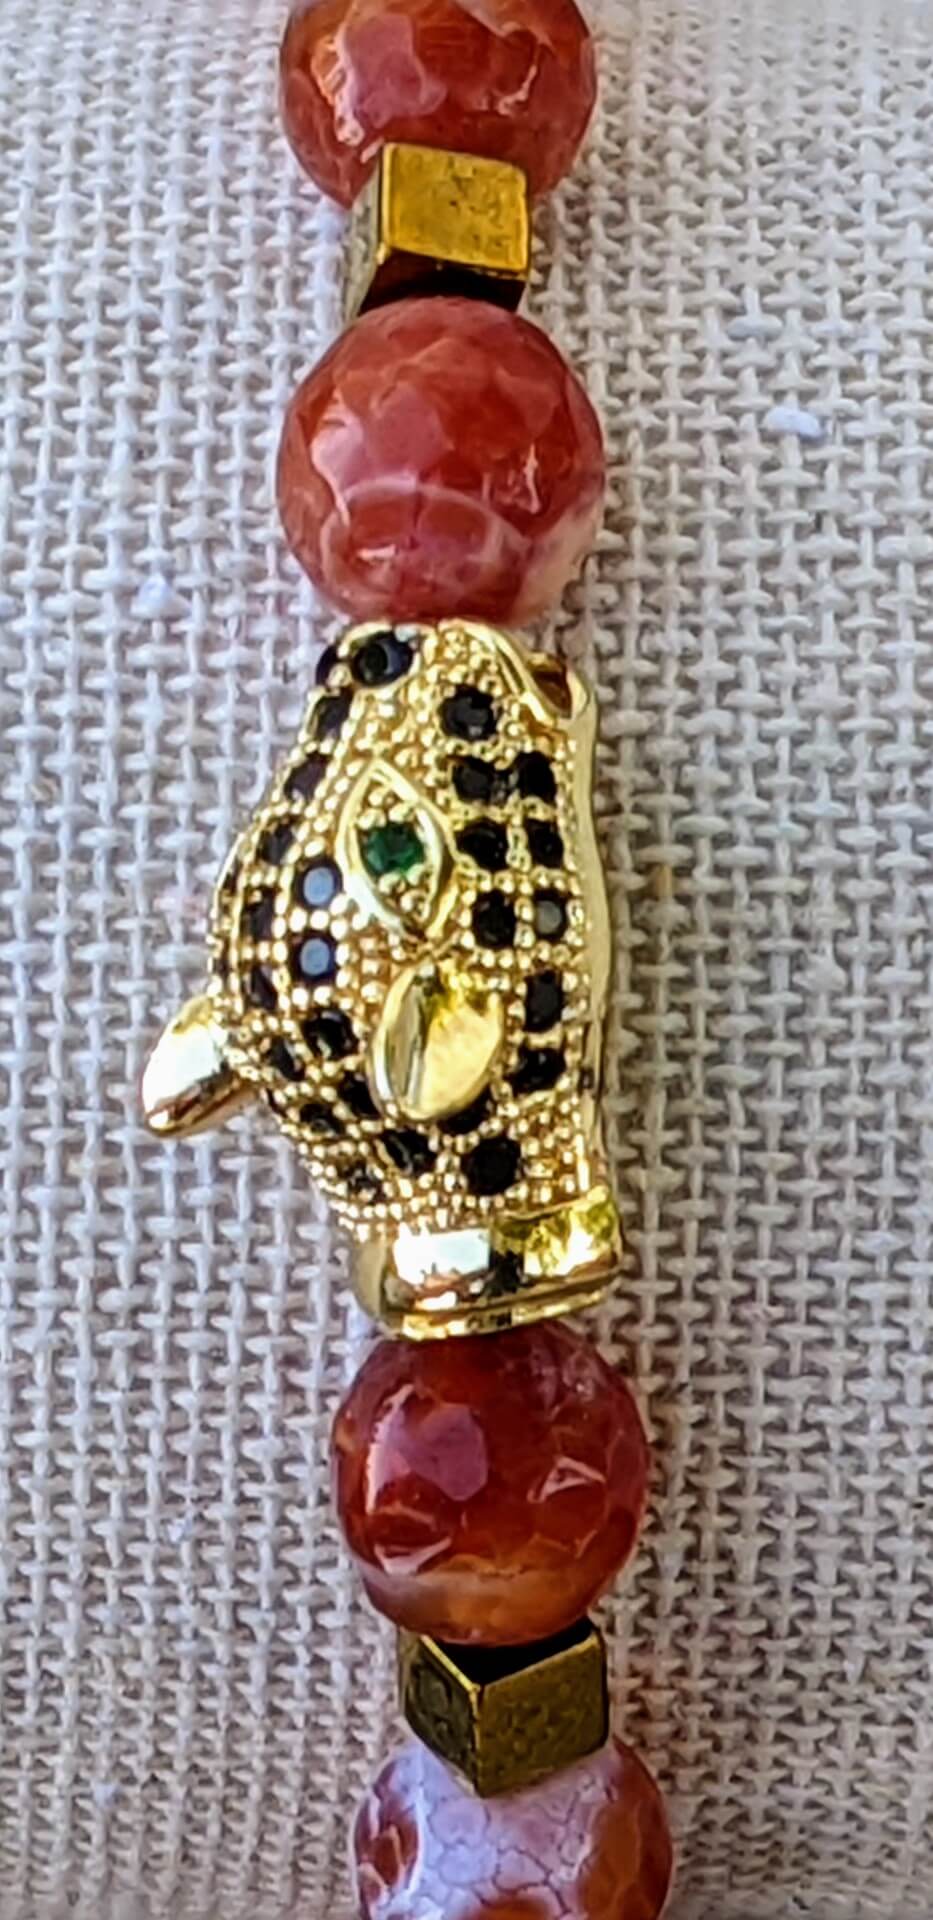 Gold Jaguar with Orange & White Agate and Hematite Spacers